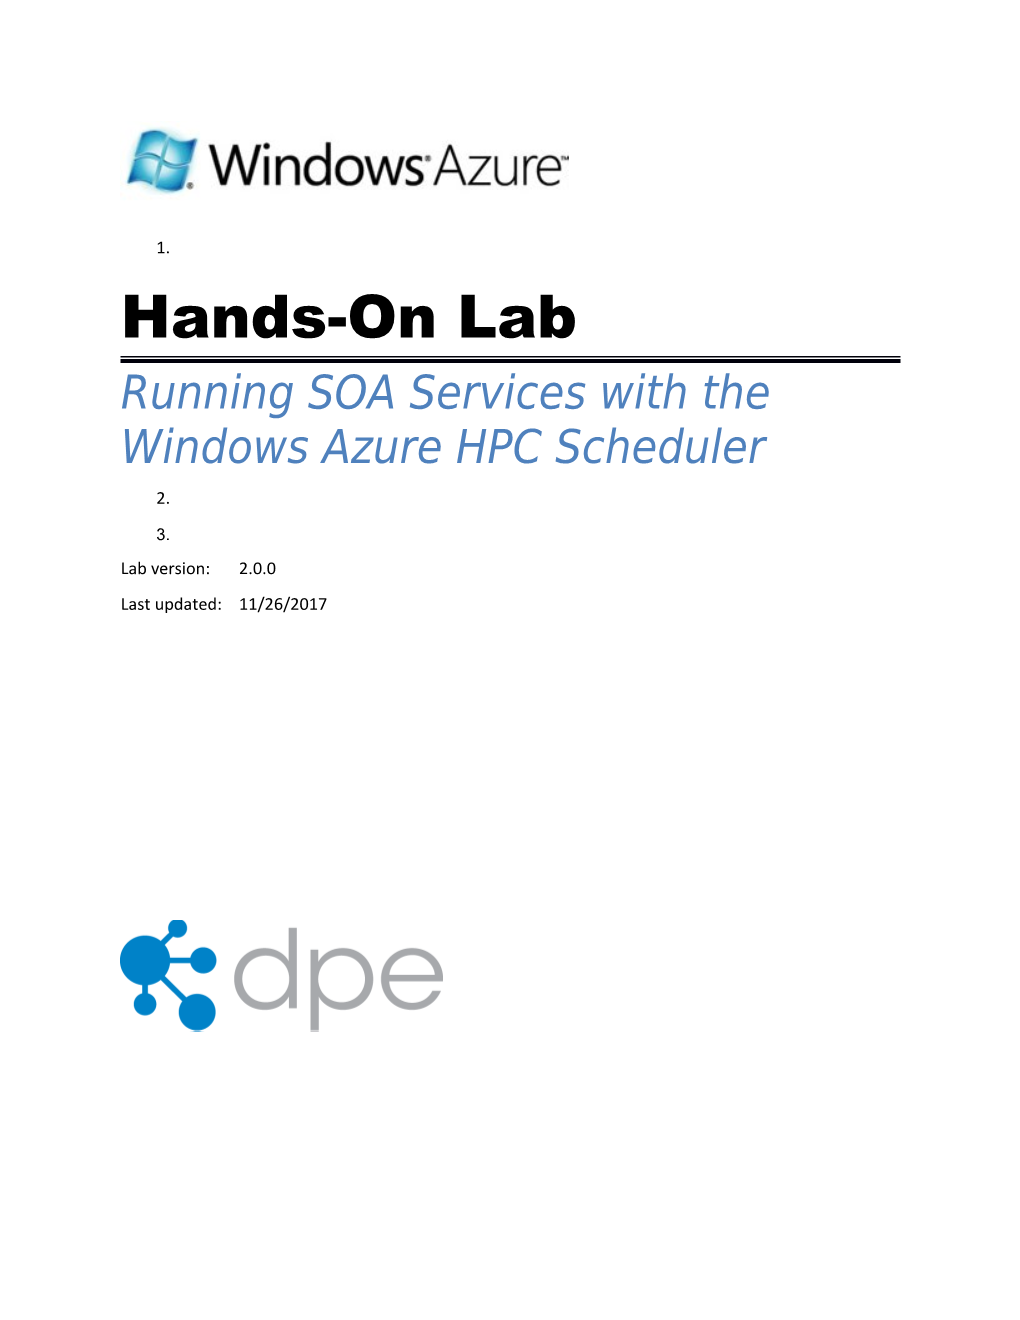 Running SOA Services With The Windows Azure HPC Scheduler